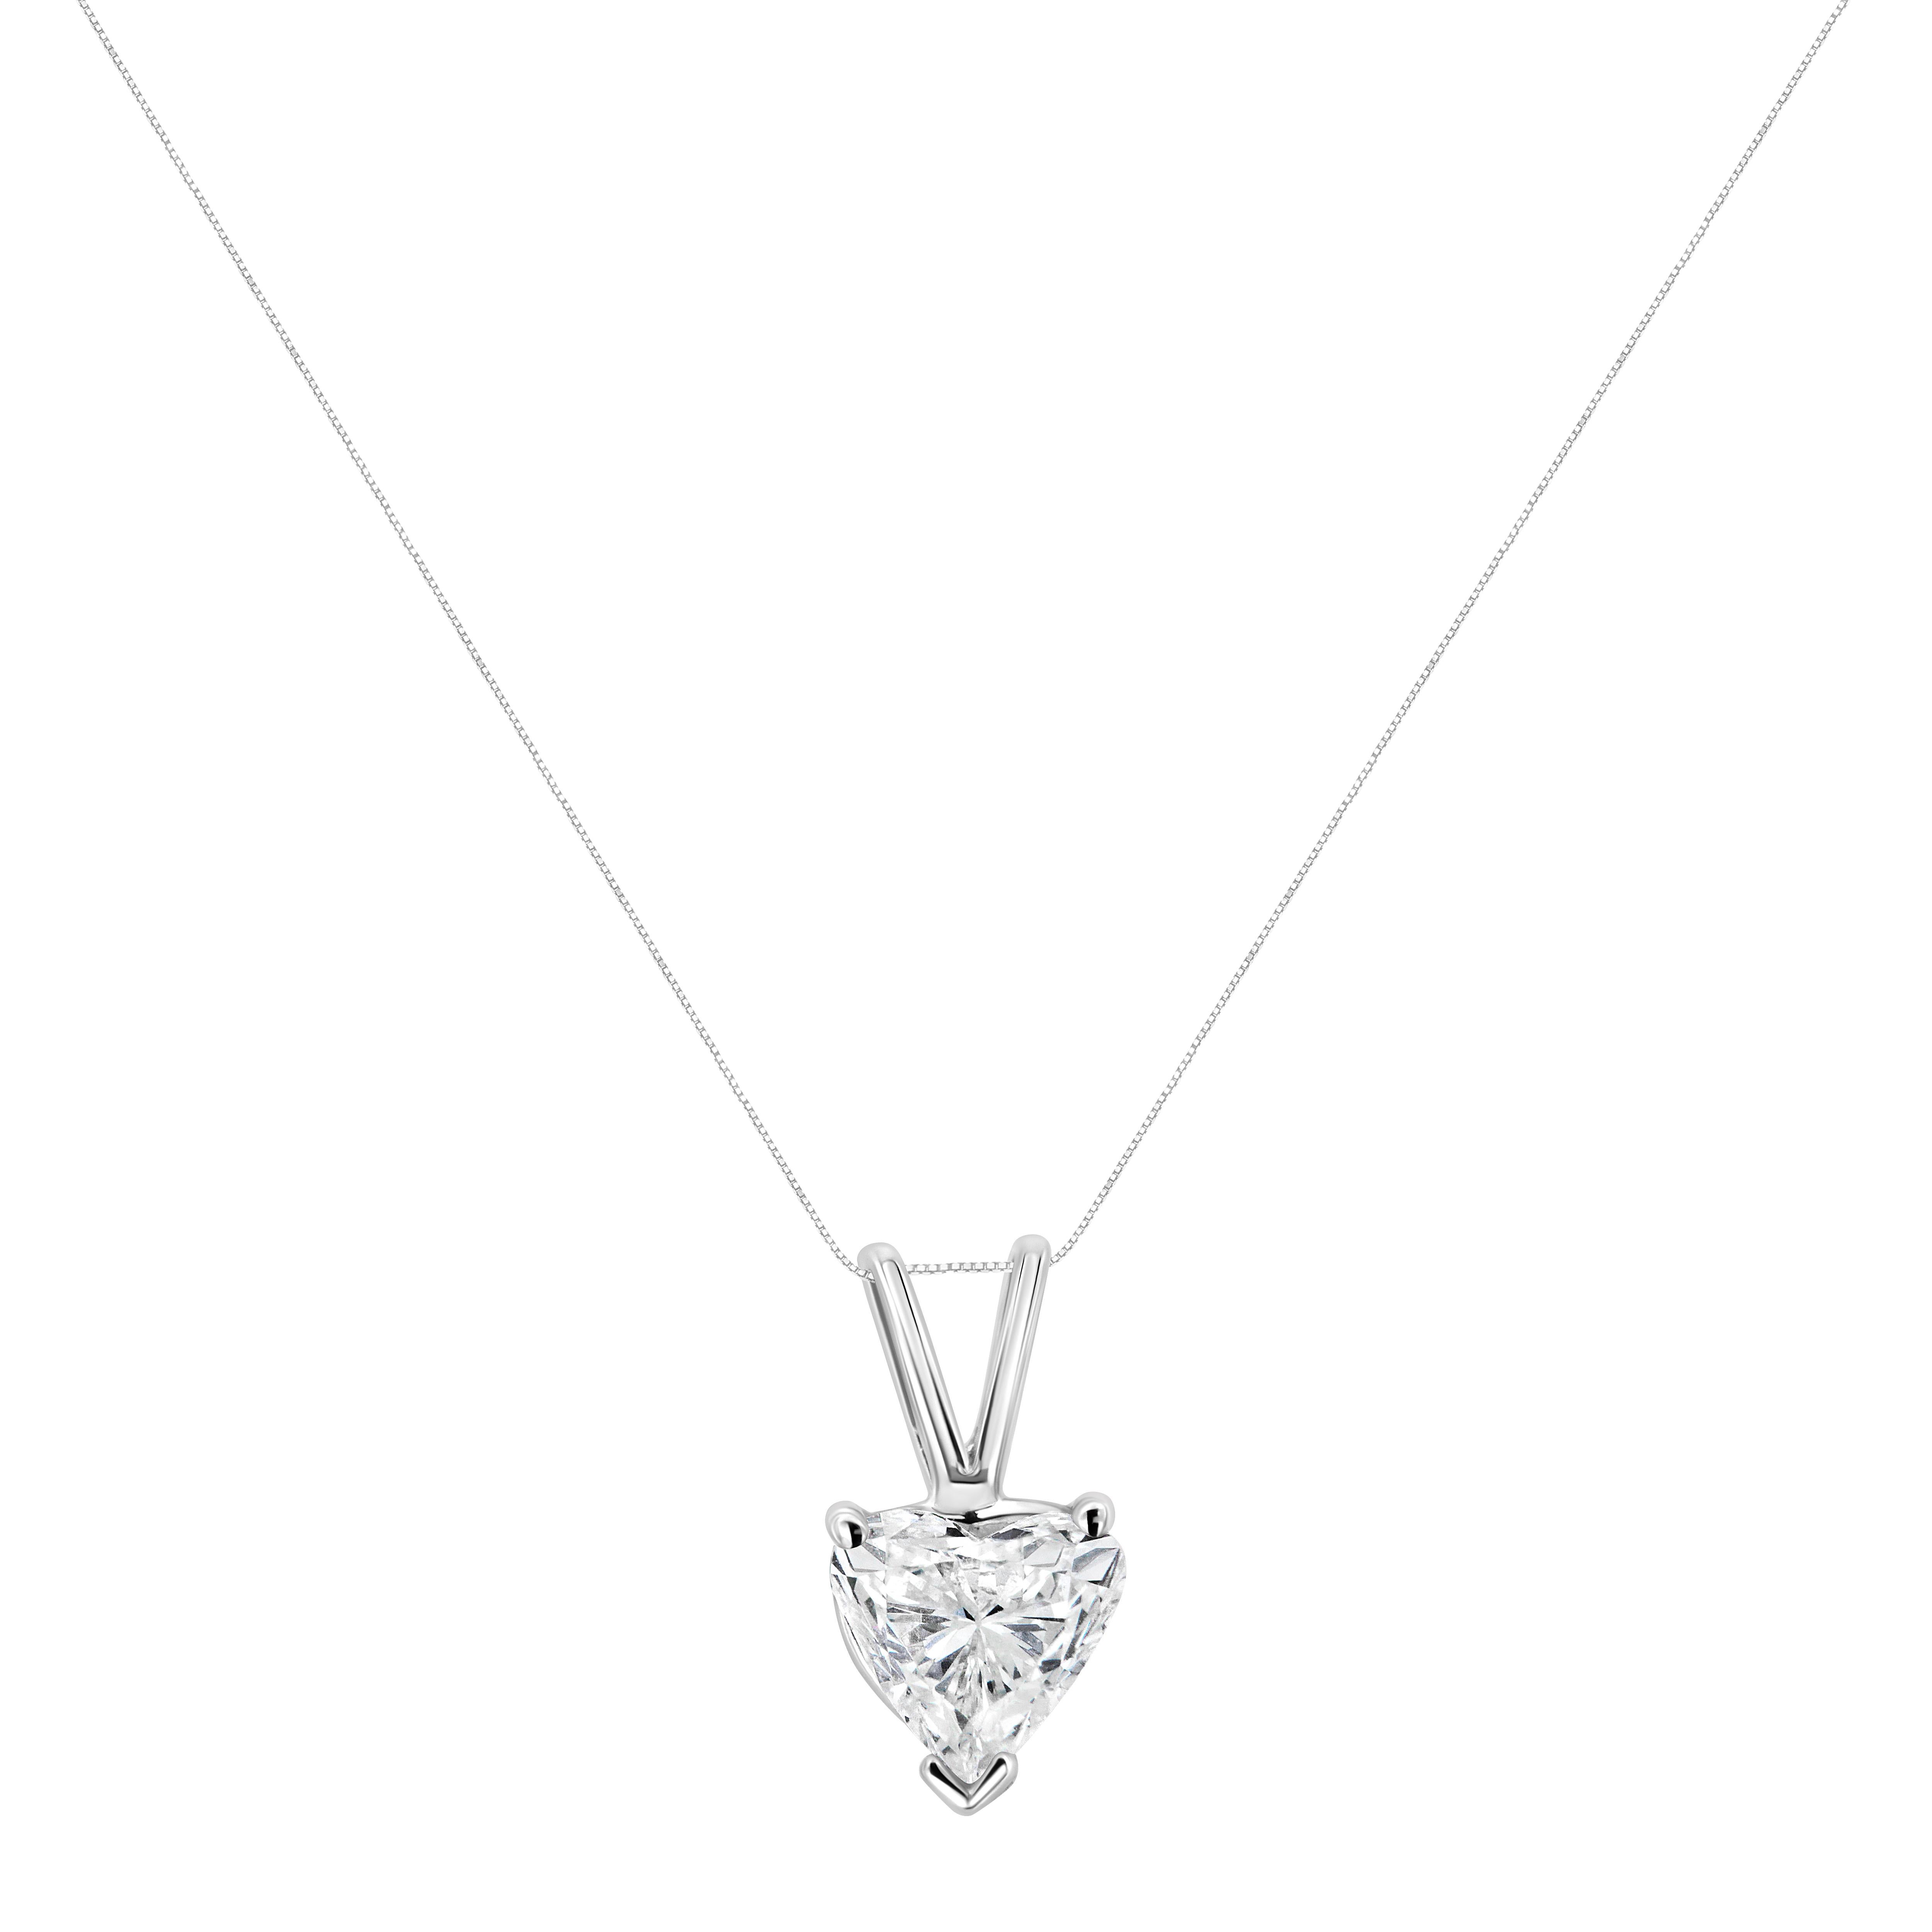 An elegant heart-shaped diamond is the brilliant focal point of this solitaire necklace for her. Set in 14K white gold, the diamond suspends from an 18-inch cable chain that secures with a spring ring. The simplicity of a perfect diamond will